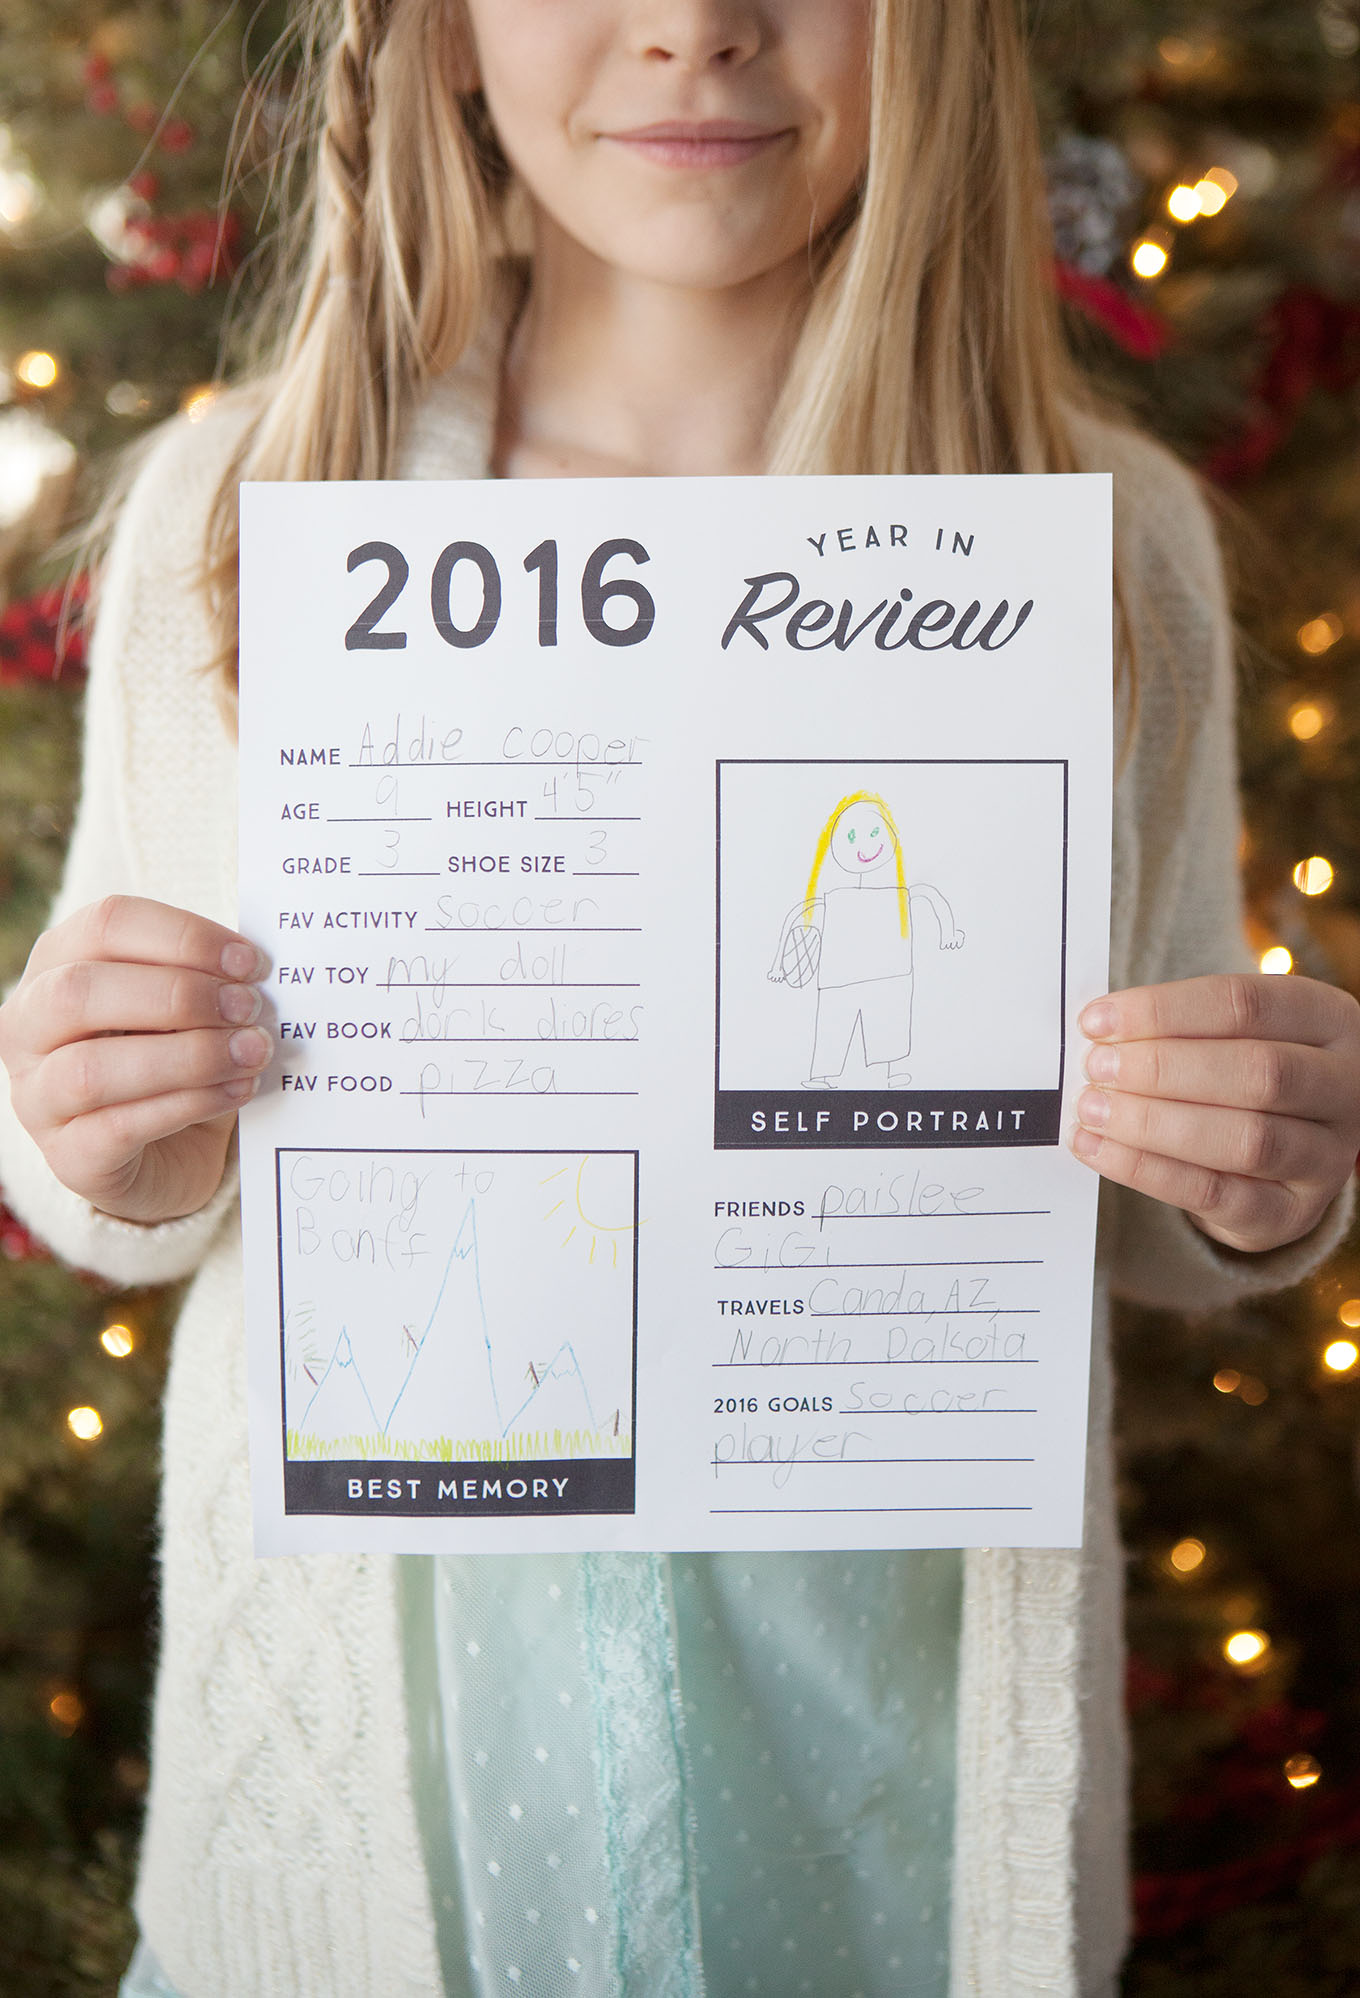 This free printable year in review sheet gives kids a chance to reflect on their favorite memories from the past year and look ahead to new goals and adventures in 2016!